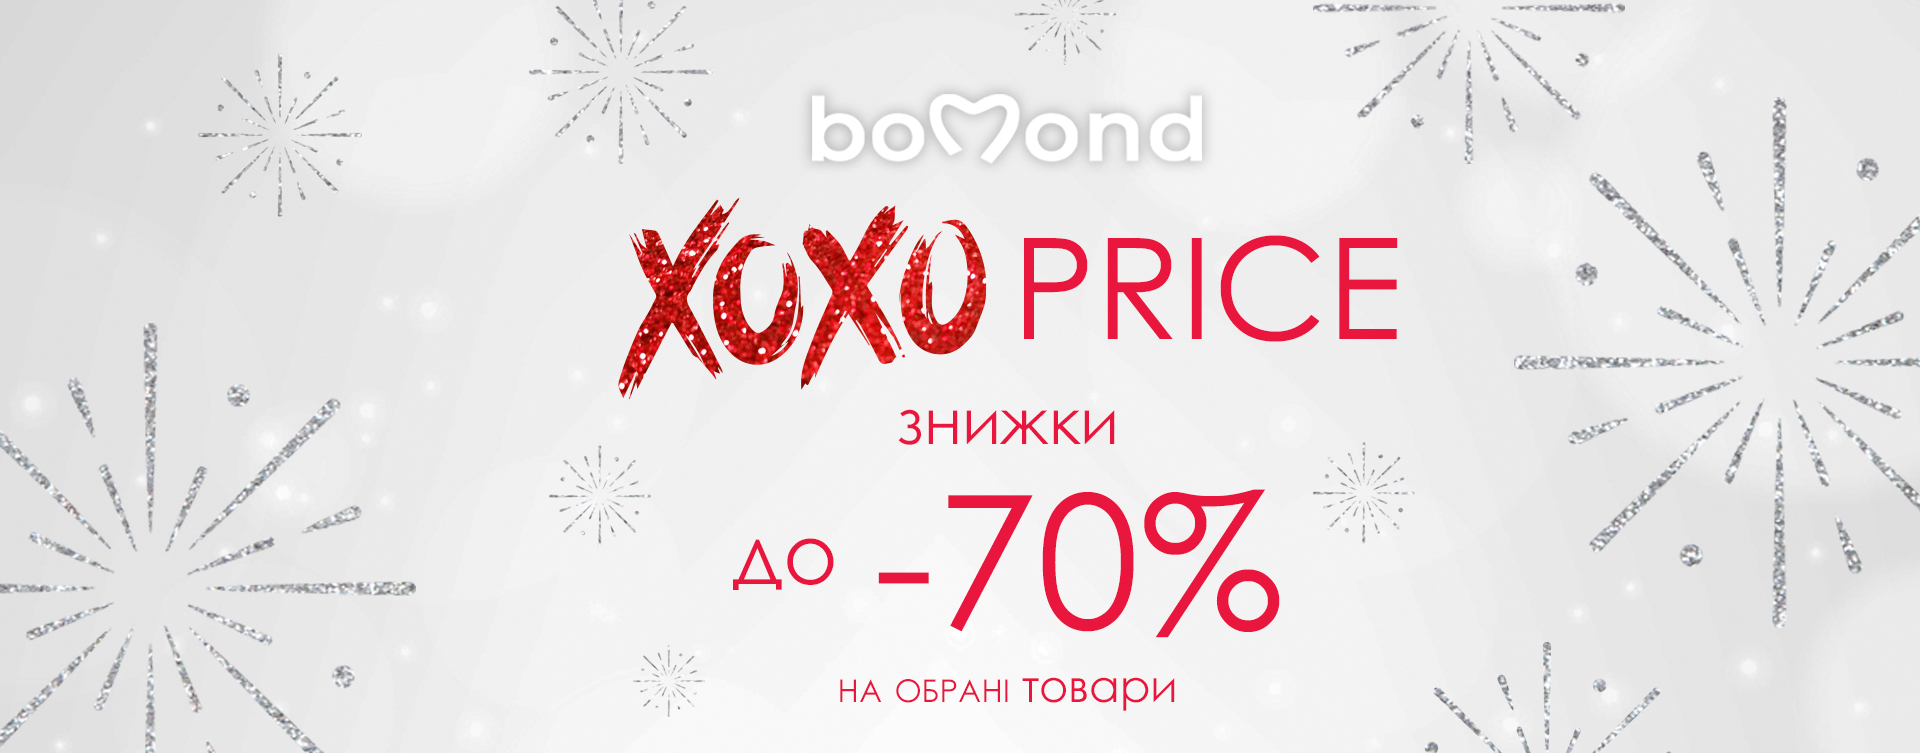 Ho Ho Price with discounts up to 70%